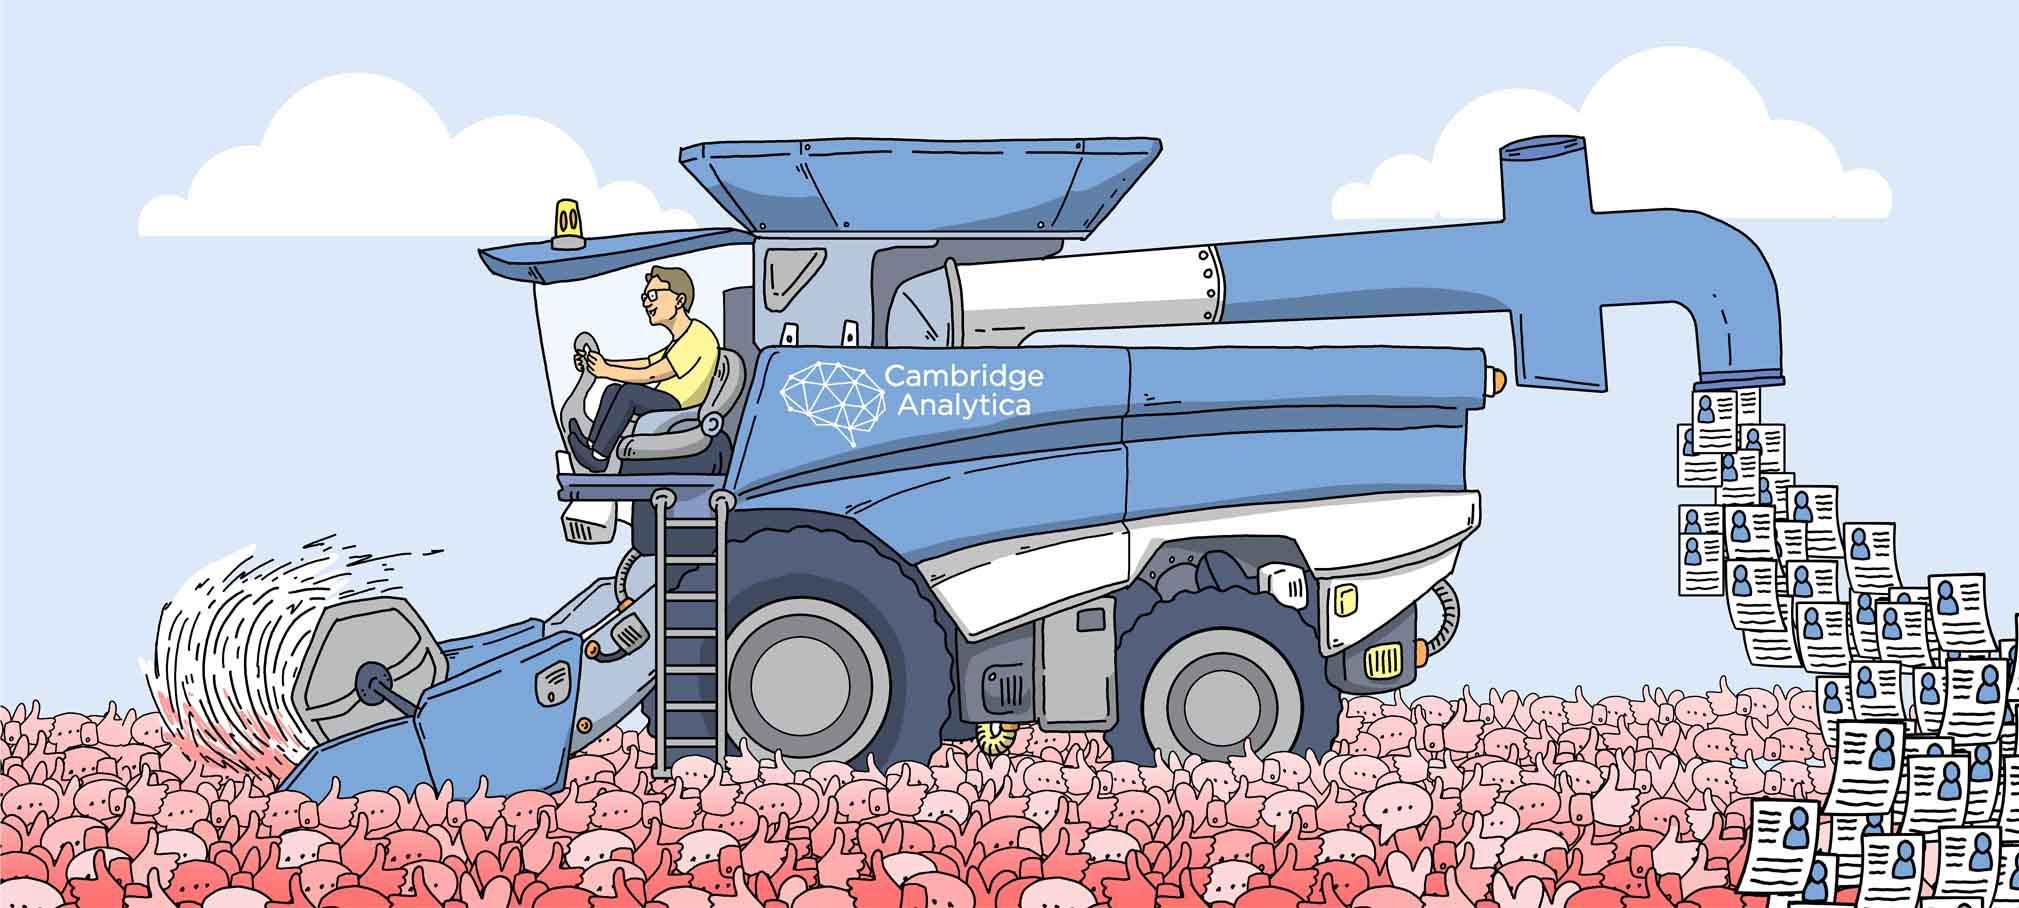 Cambridge Analytica tractor getting personal information from Facebook's private data collection